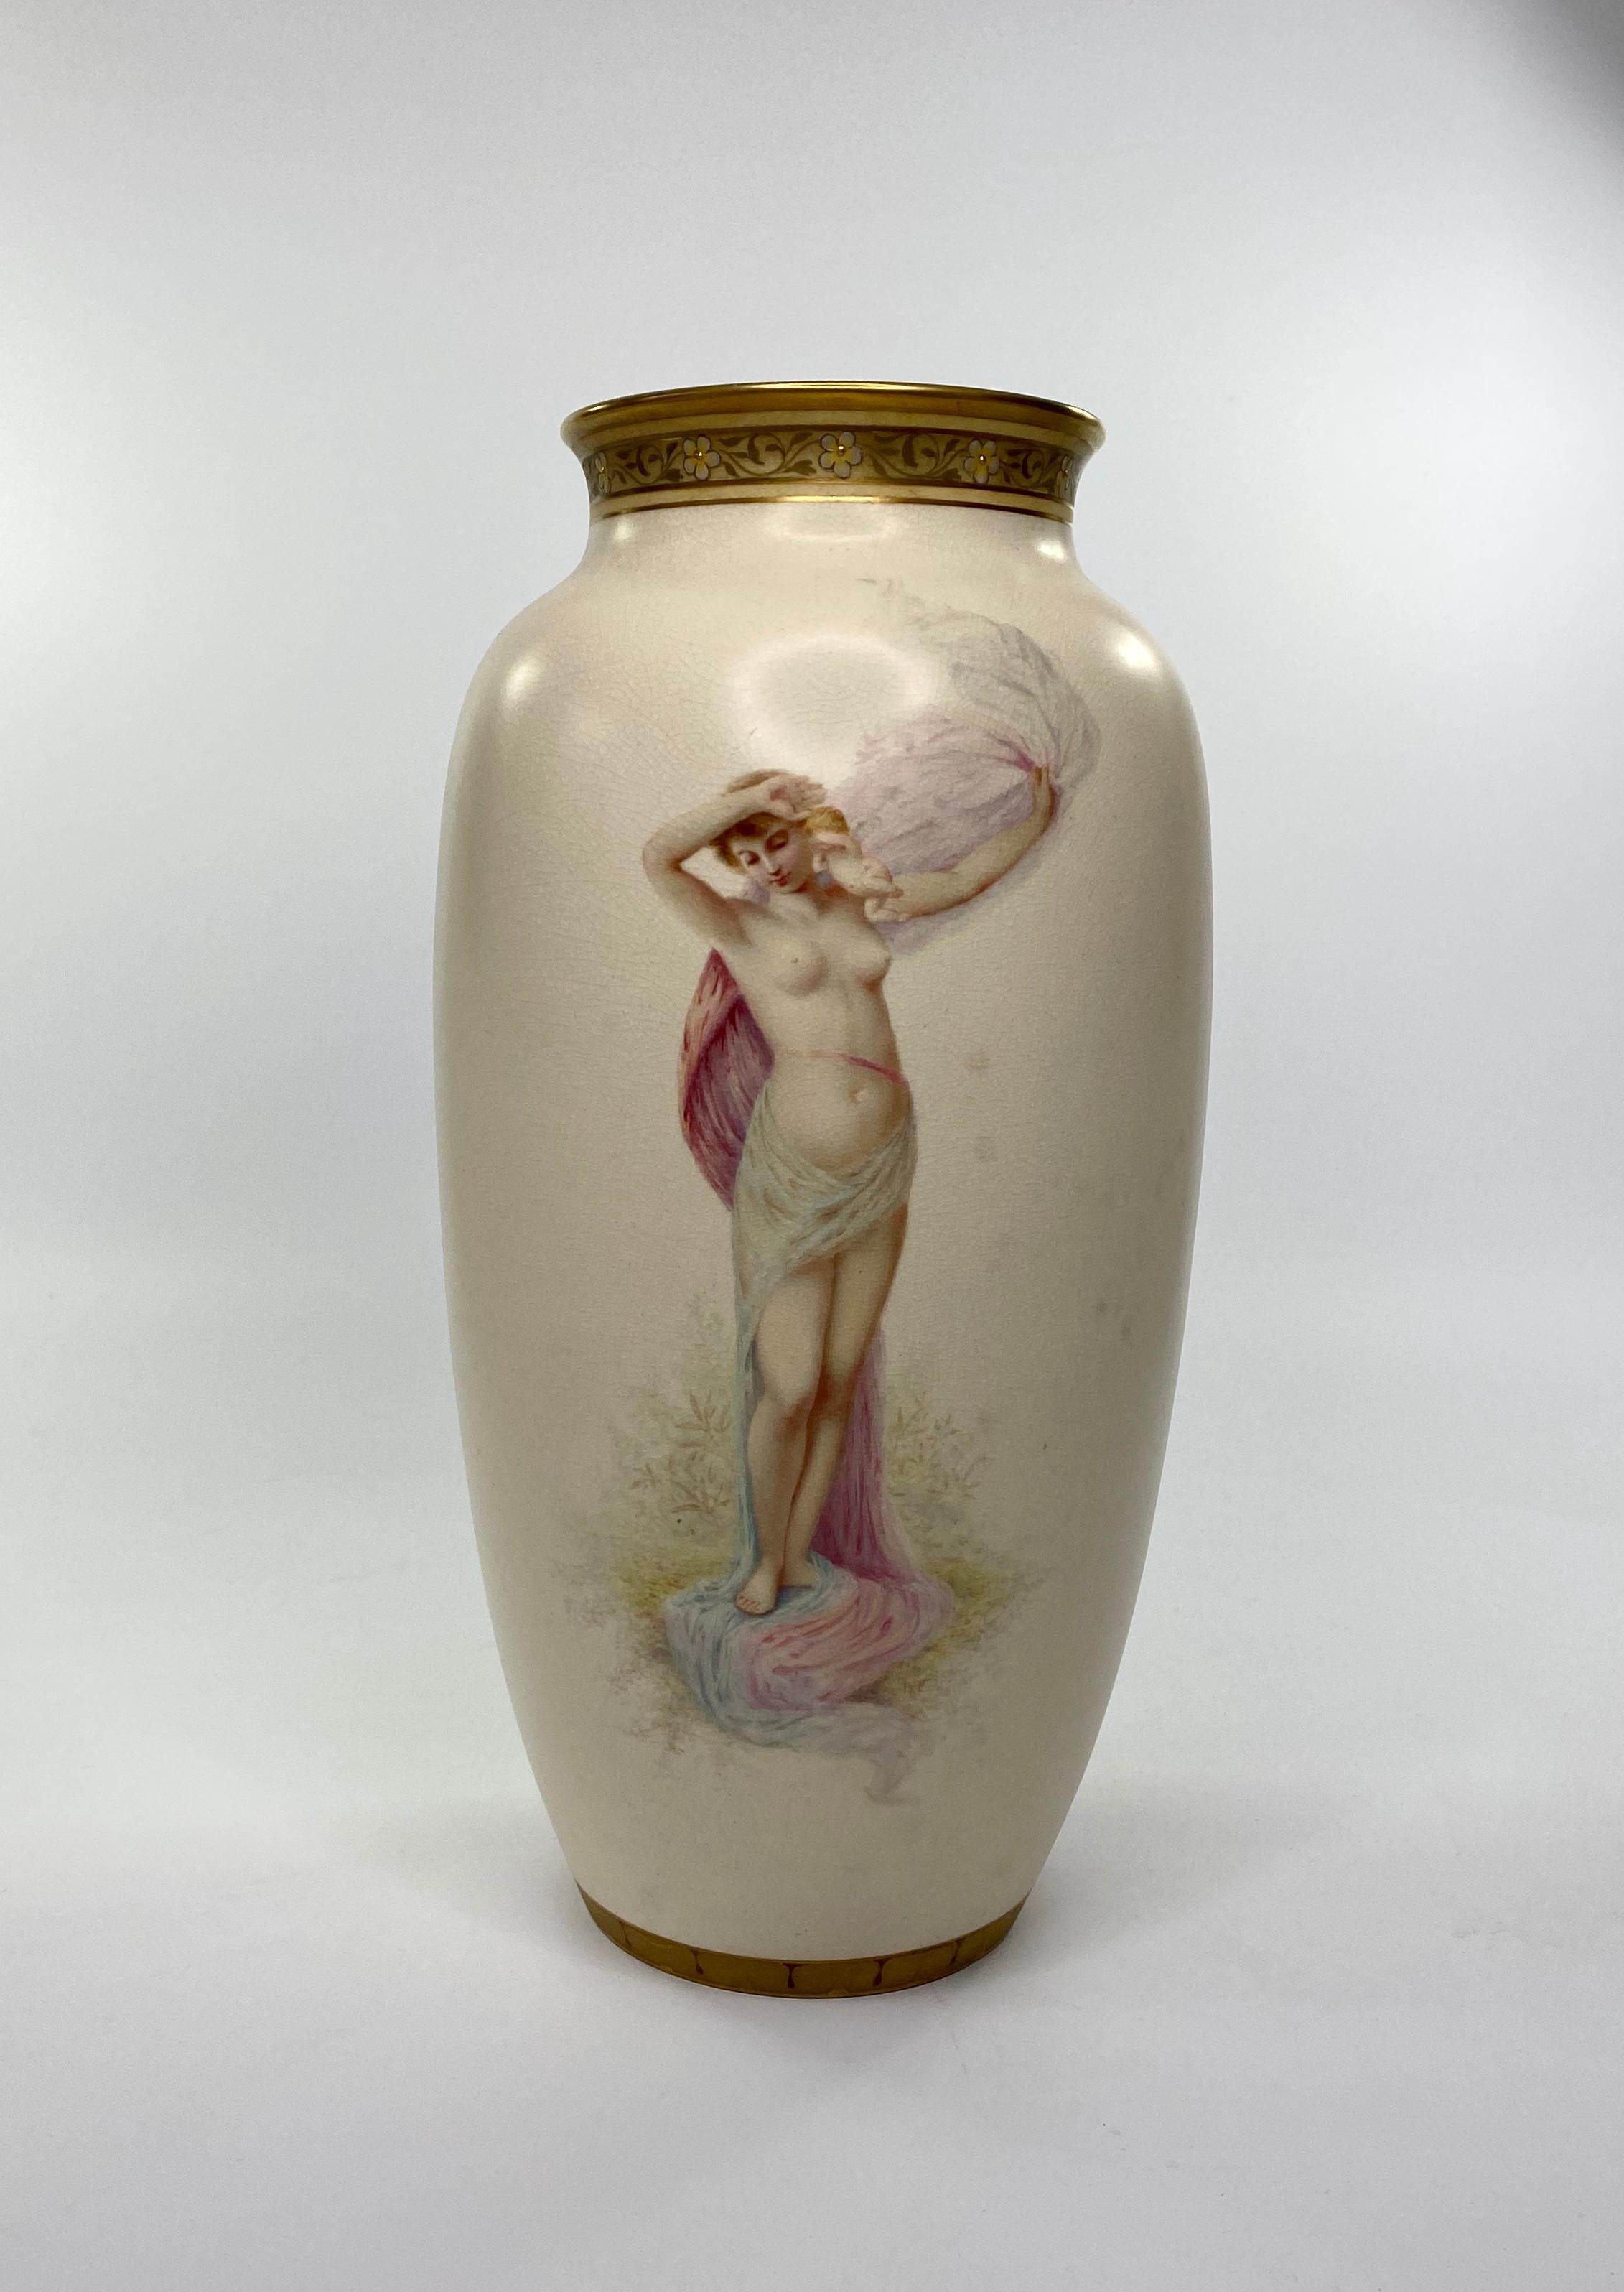 A fine pair of Doulton Lambeth faience vases, painted by John P. Hewitt, circa 1885. Both vases, beautifully hand painted with semi naked girls, posing in diaphanous drapes, whilst standing, bare foot on grass.
The rims, with continuous bands of